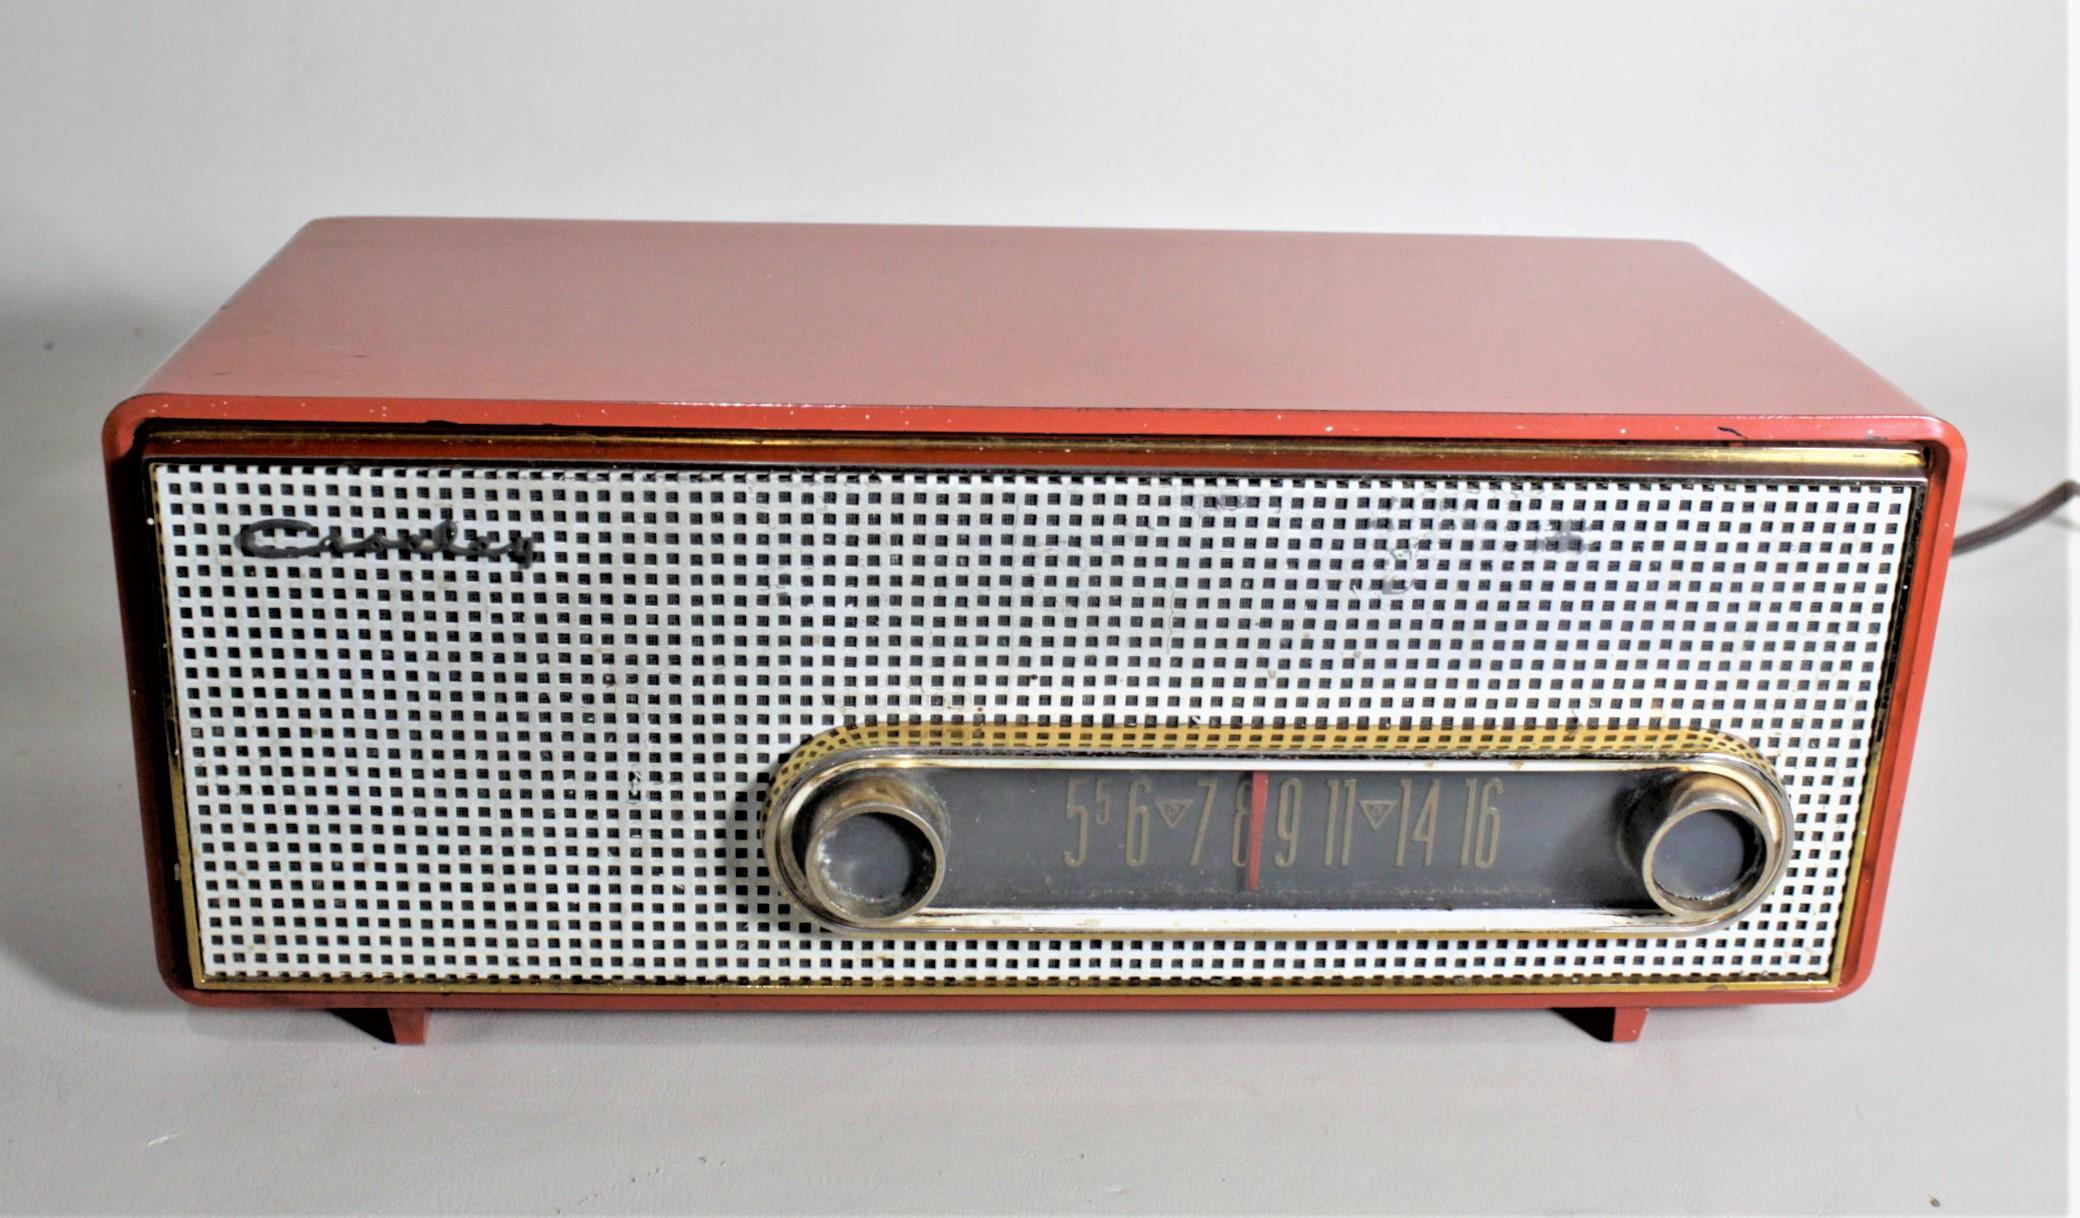 This Mid-Century Modern working tube radio was made by Crosley in Toronto Canada in approximately 1965 in the period stream-lined style. The radio is done with a molded coral pink plastic case with a white grill and gold toned details to the dial